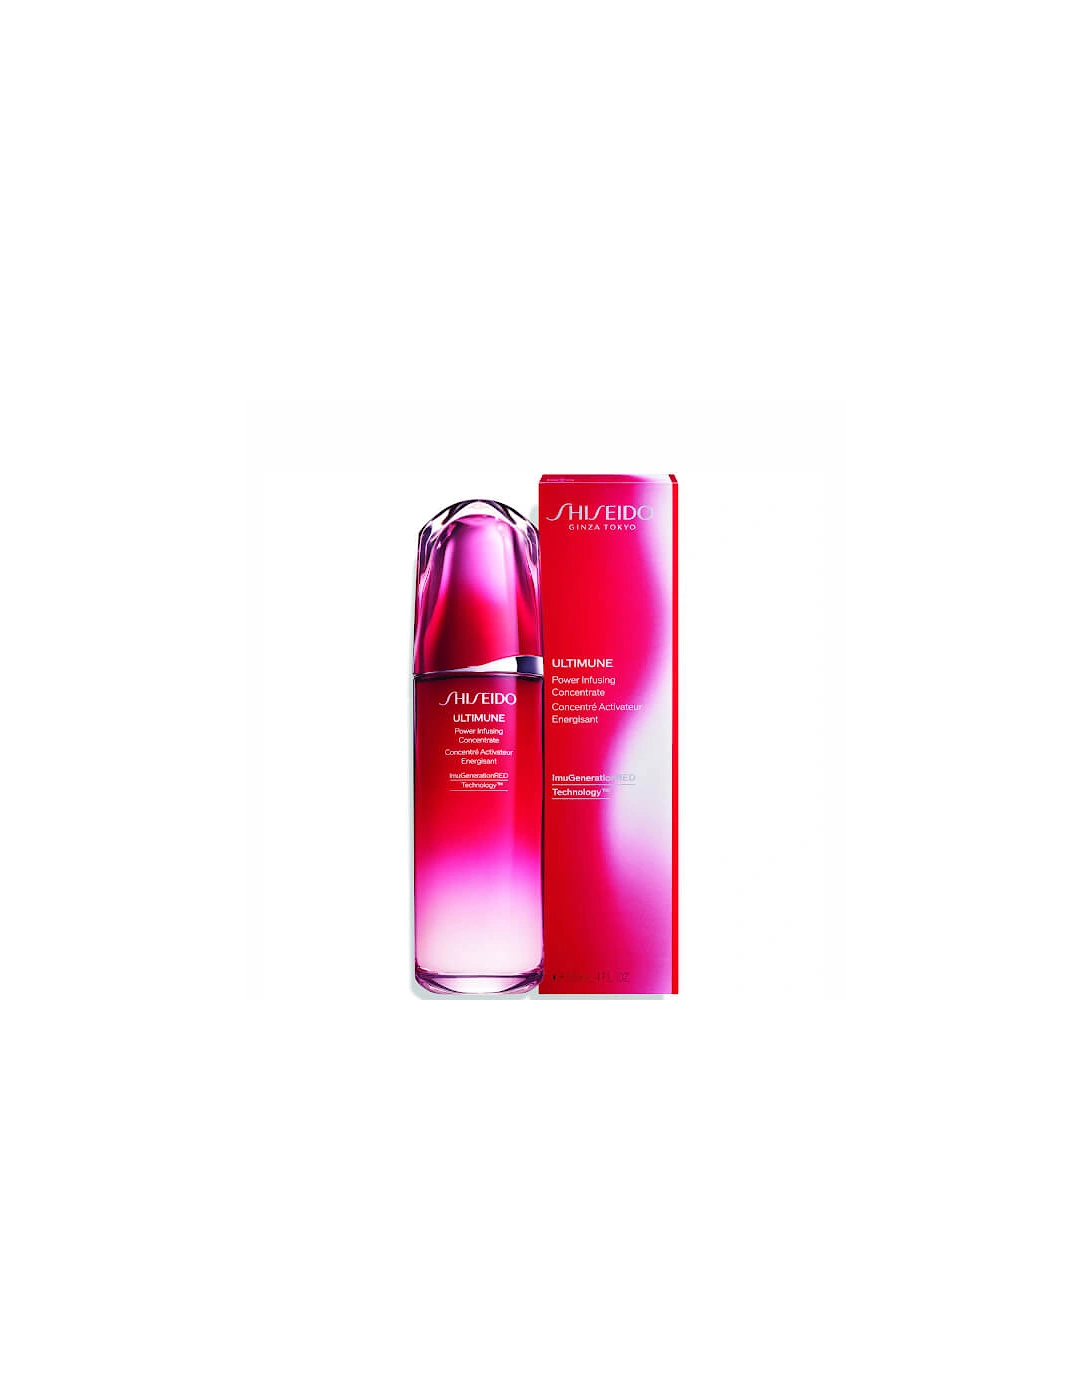 Ultimune Power Infusing Concentrate Limited Edition - 120ml, 2 of 1